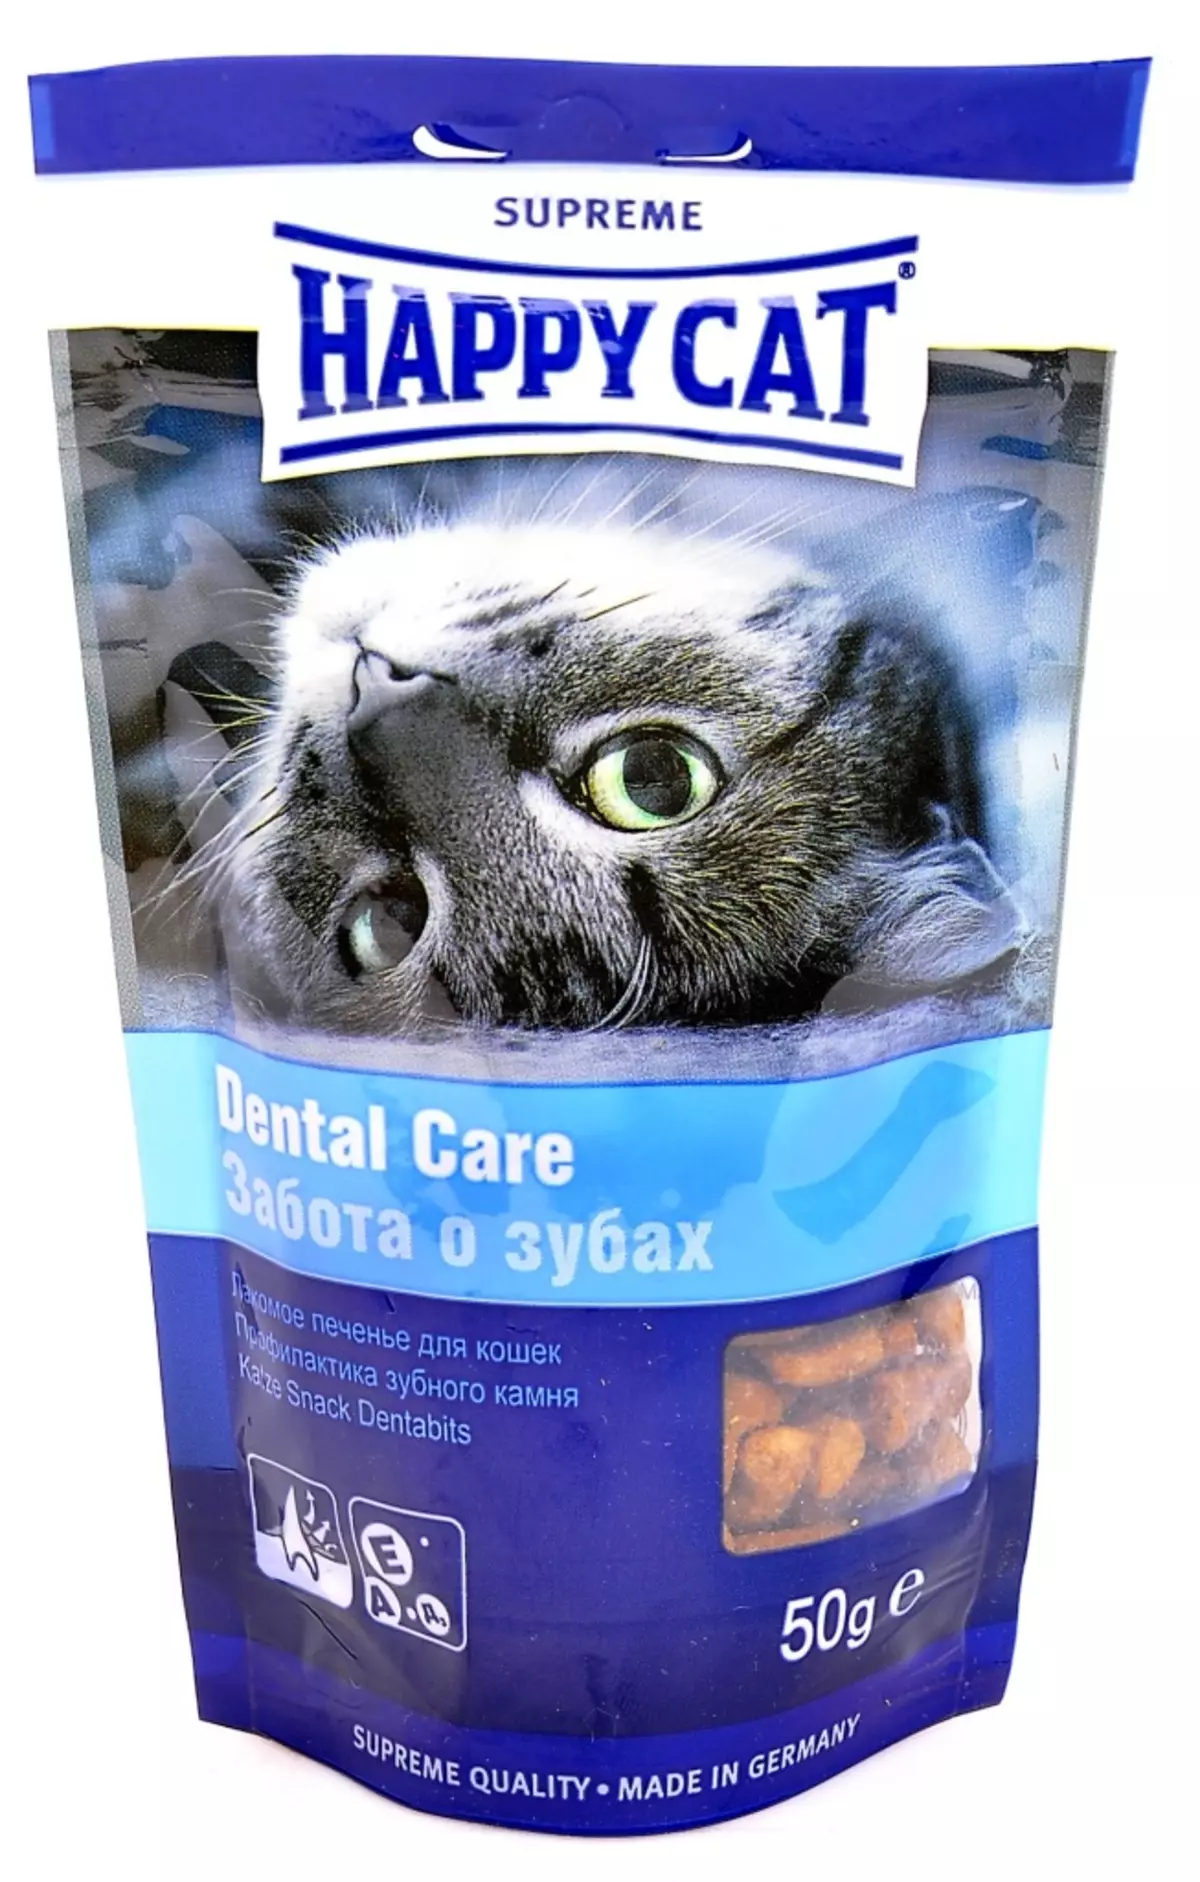 Wet feed for premium cats: rating of the best liquid feed for kittens, good soft feline food 11830_30